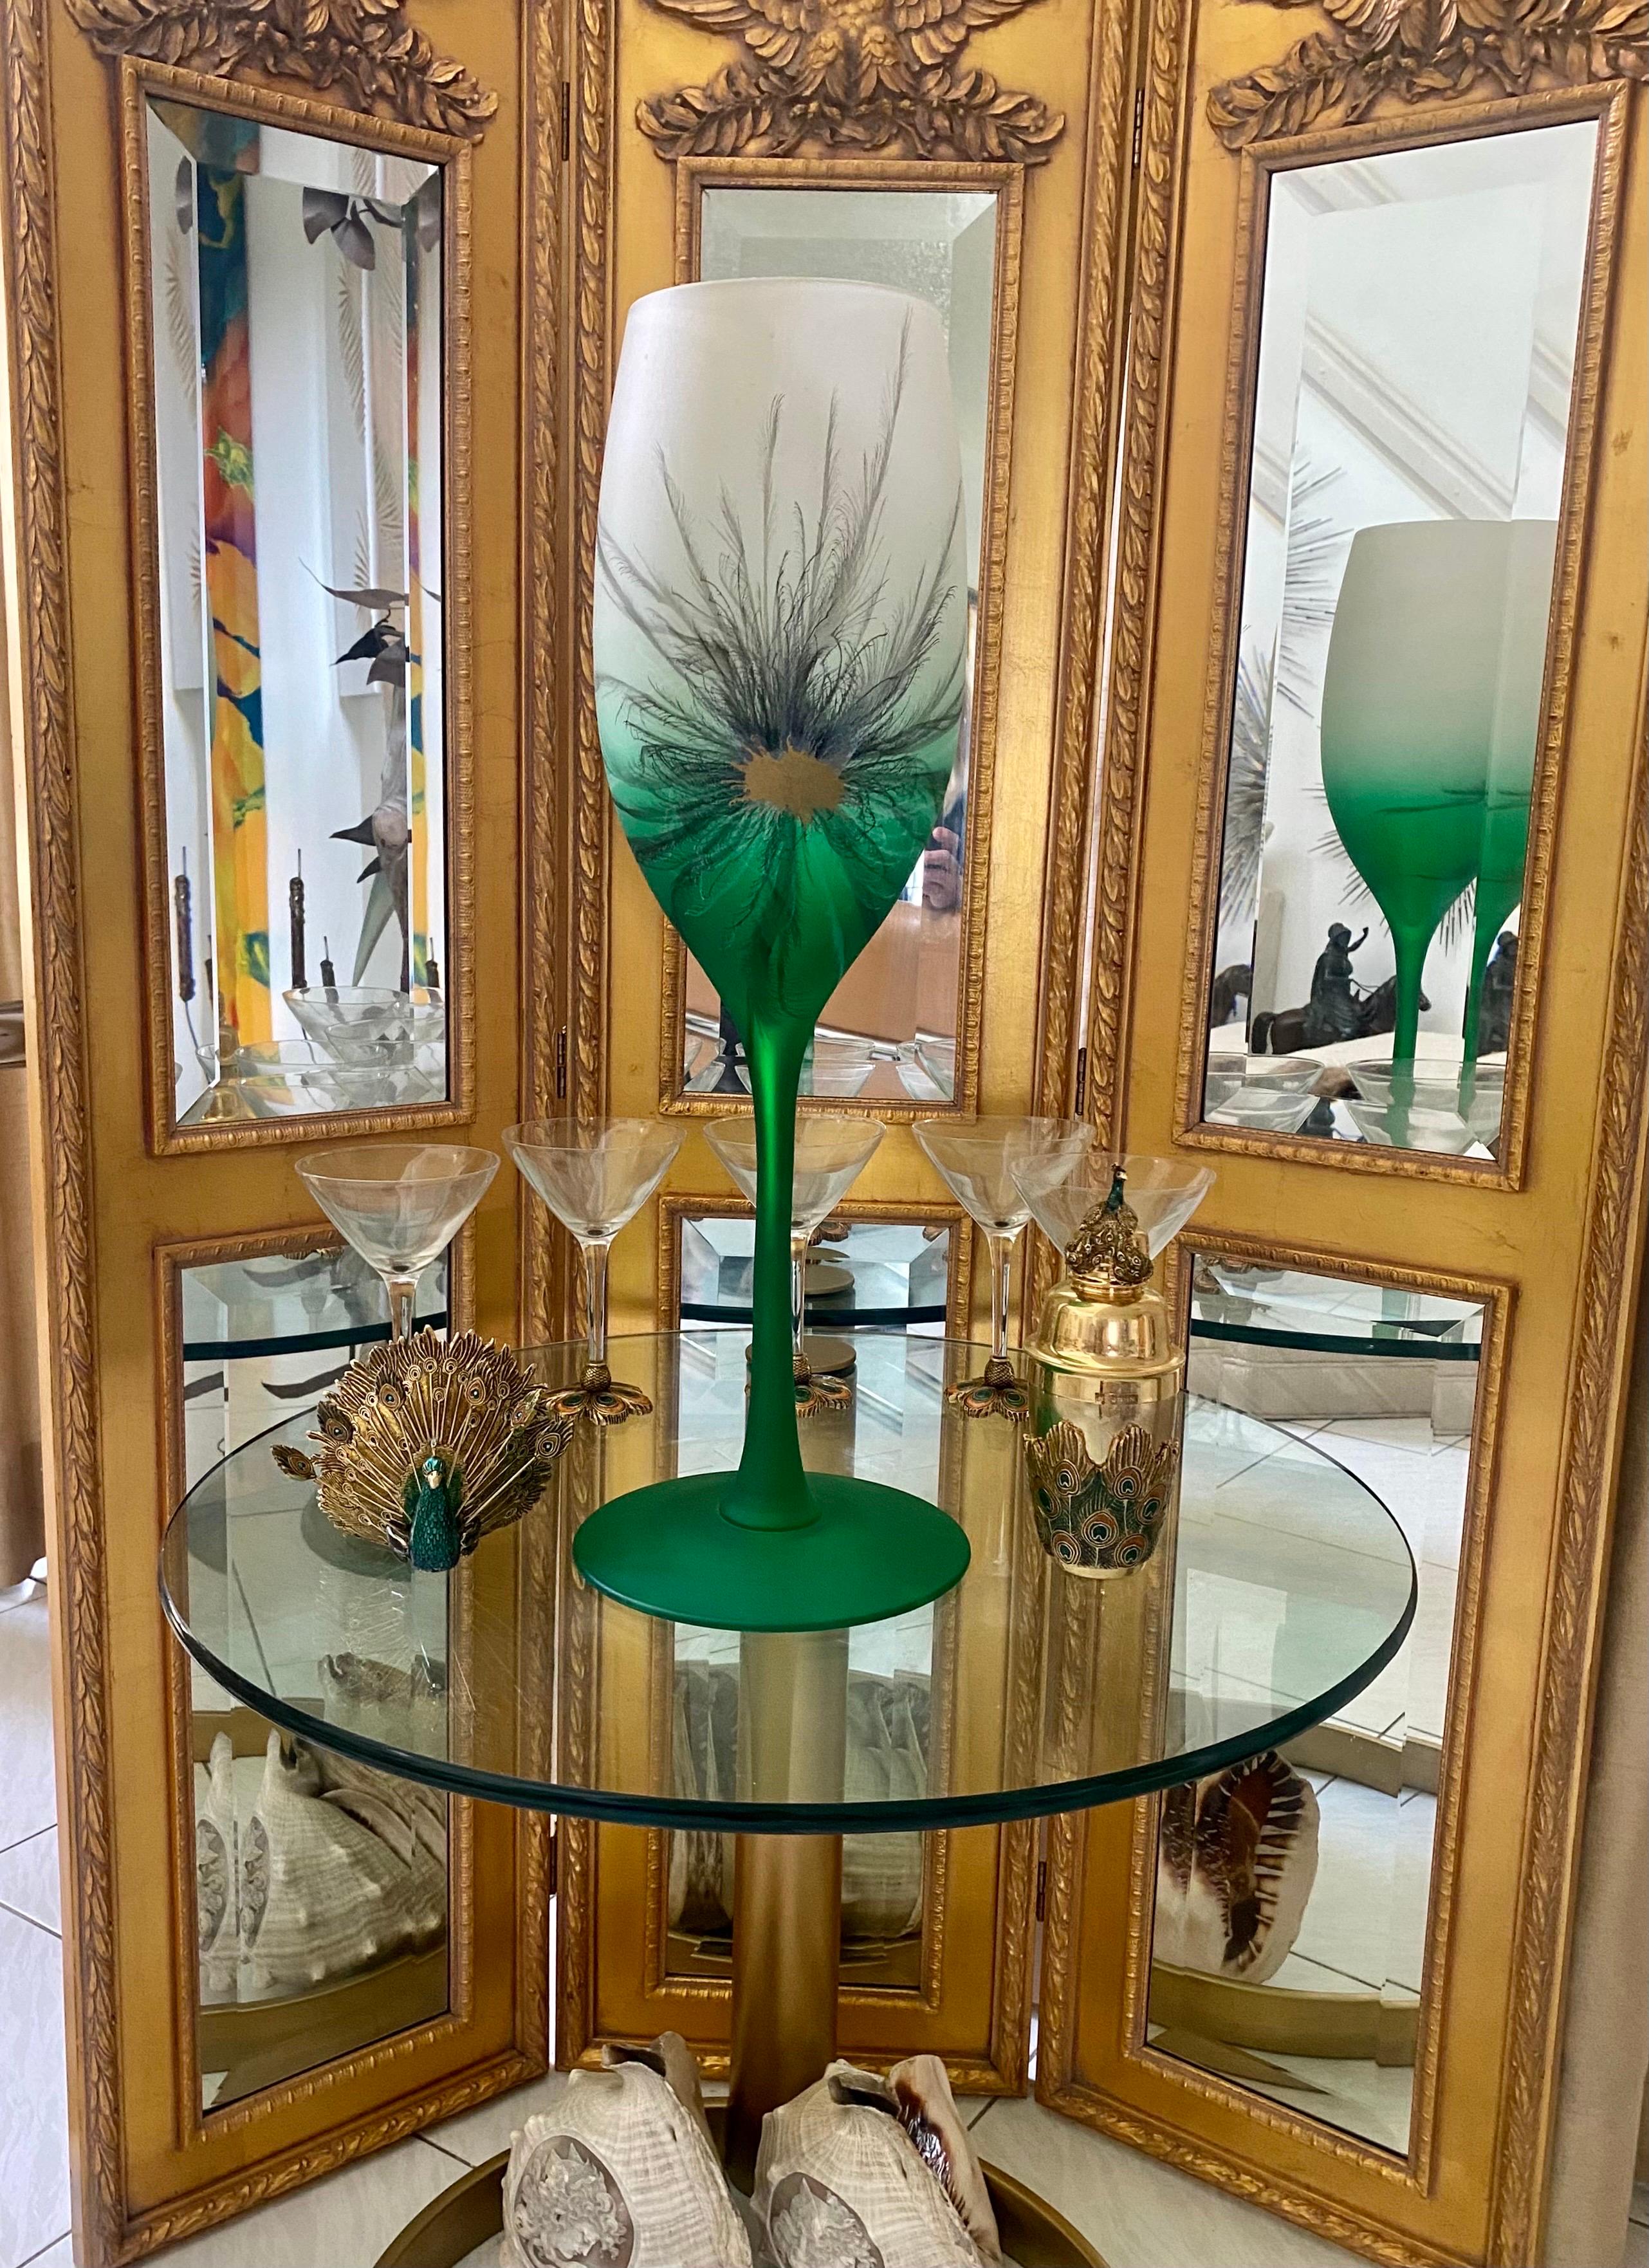 Tall two tone glass goblet shaped vase in an emerald green color that fades to white. The vase has been hand painted in a delicate feather pattern with a gold center, reminiscent of a peacock feather.